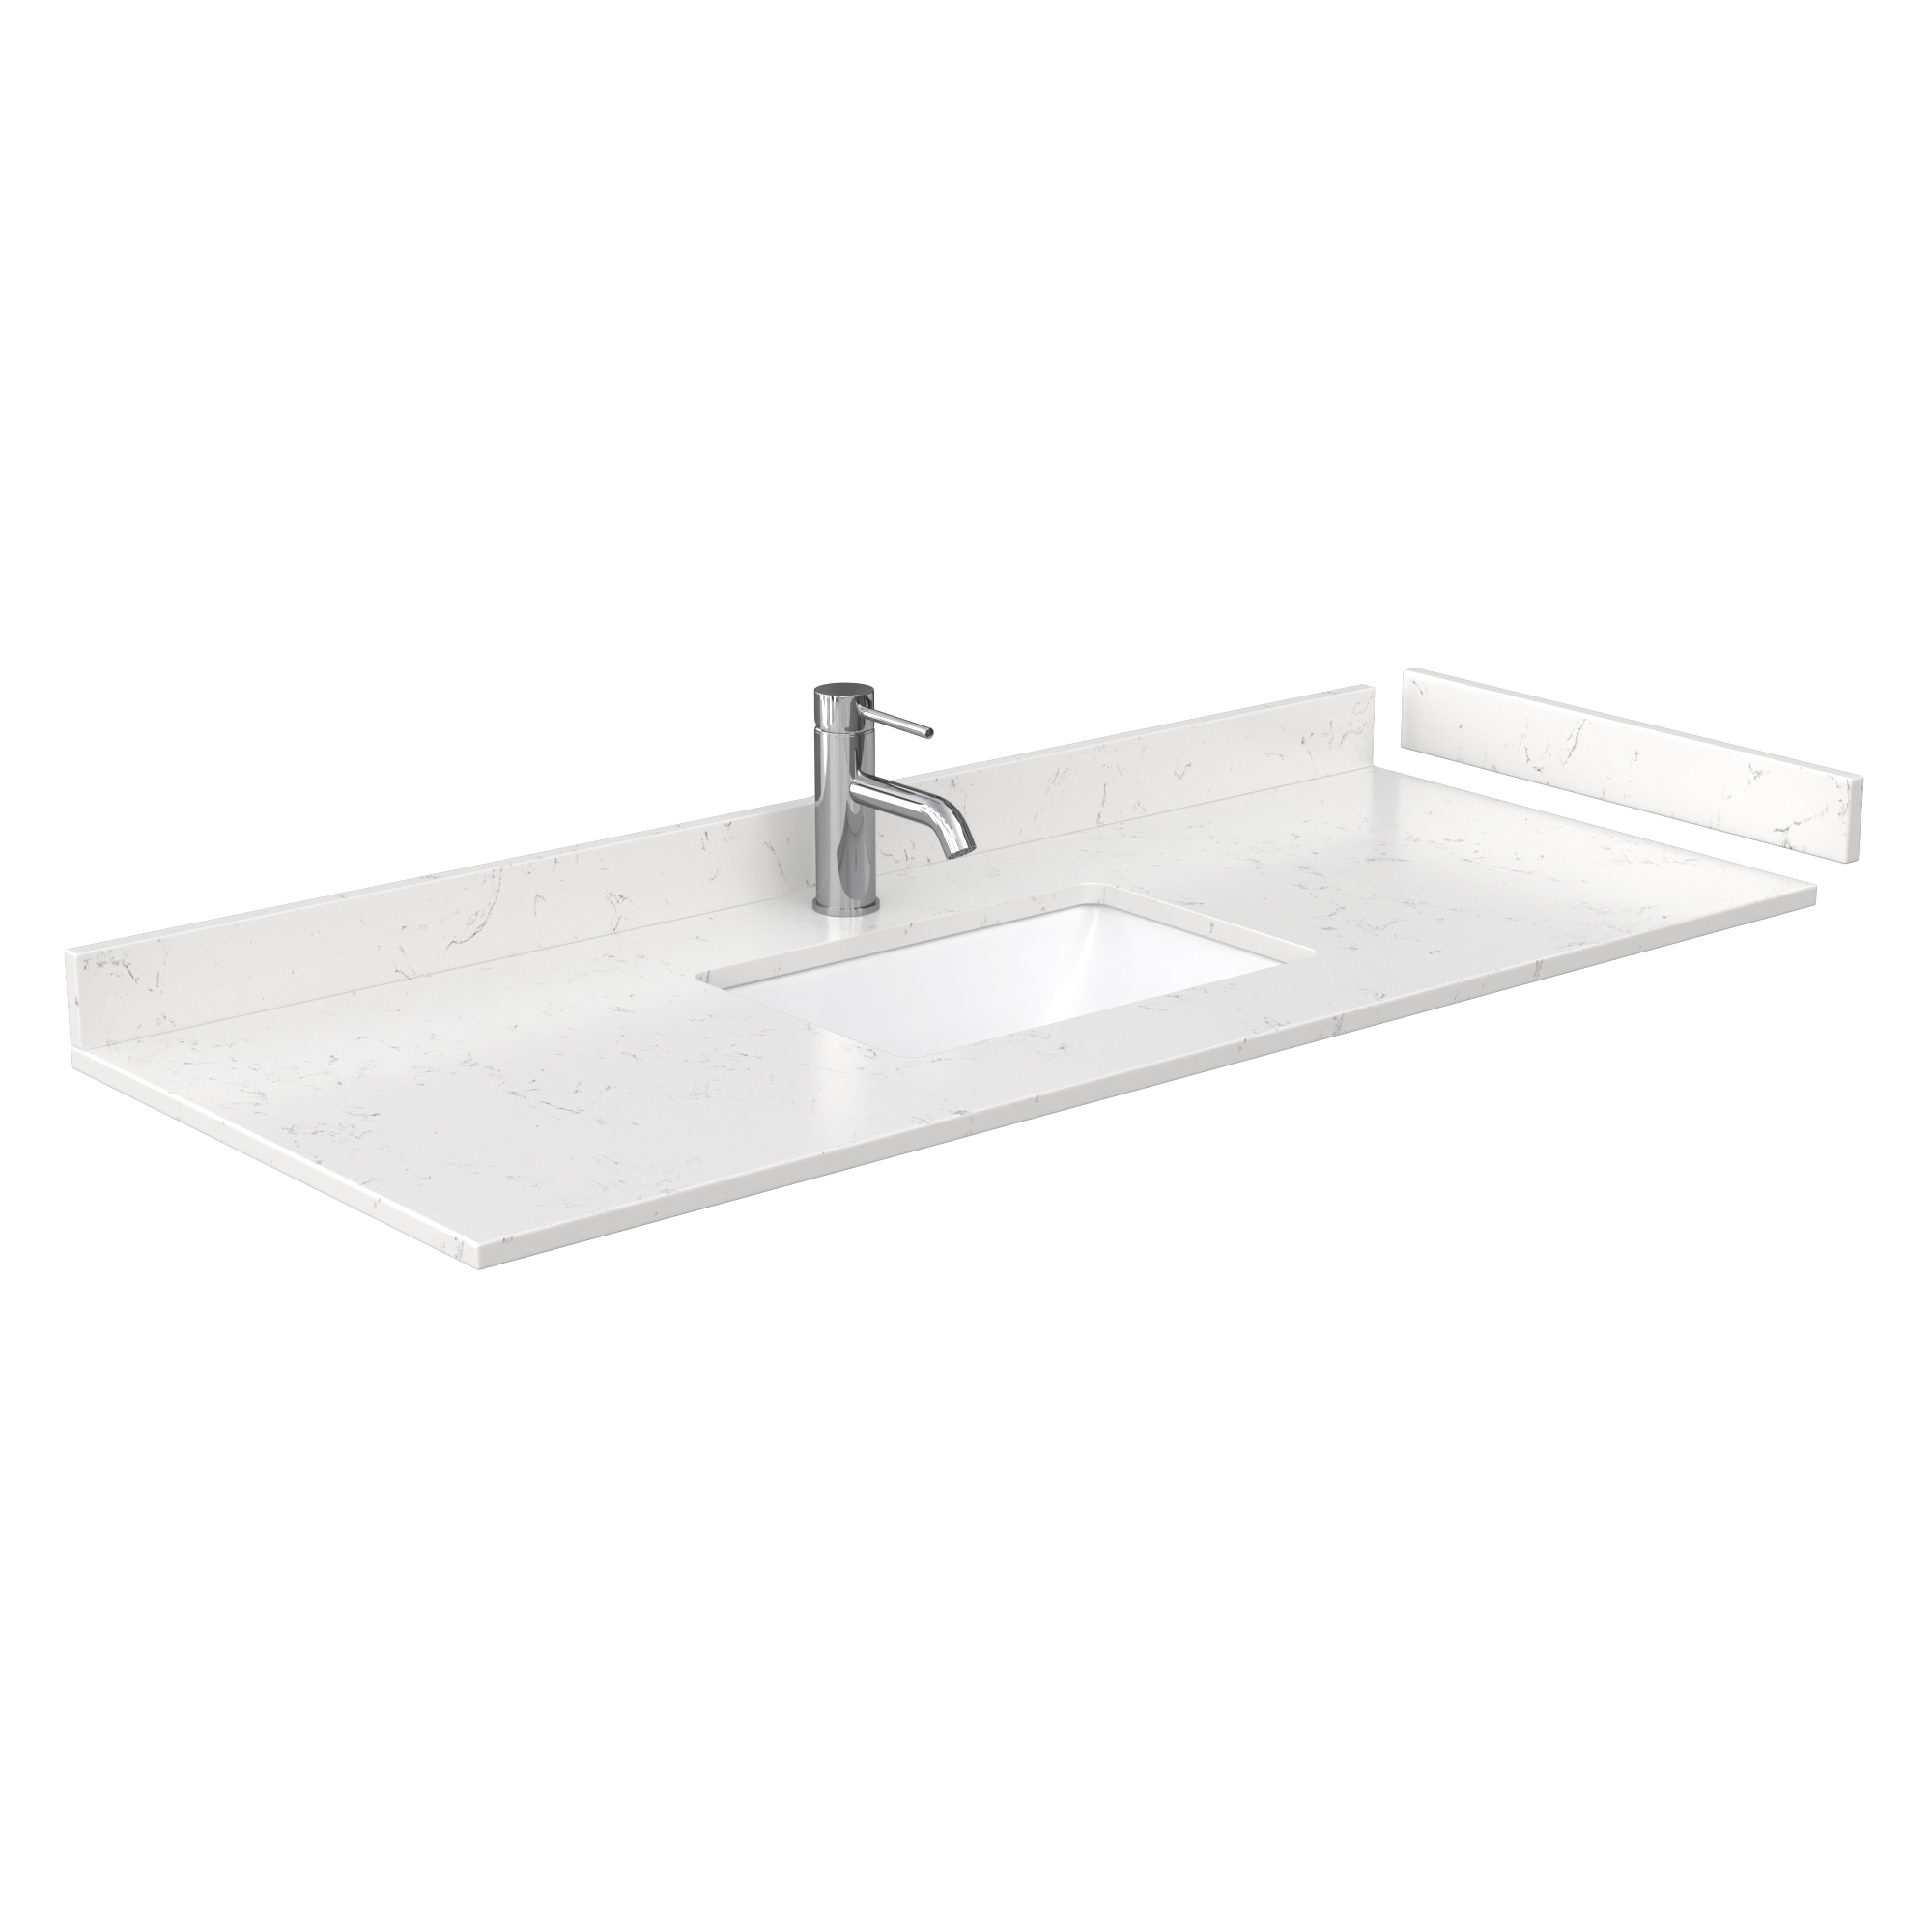 48" Single Countertop - White Cultured Marble with Undermount Square Sink - Include Backsplash and Sidesplash WC-VCA-48-SGL-TOP-UMSQ-WHC